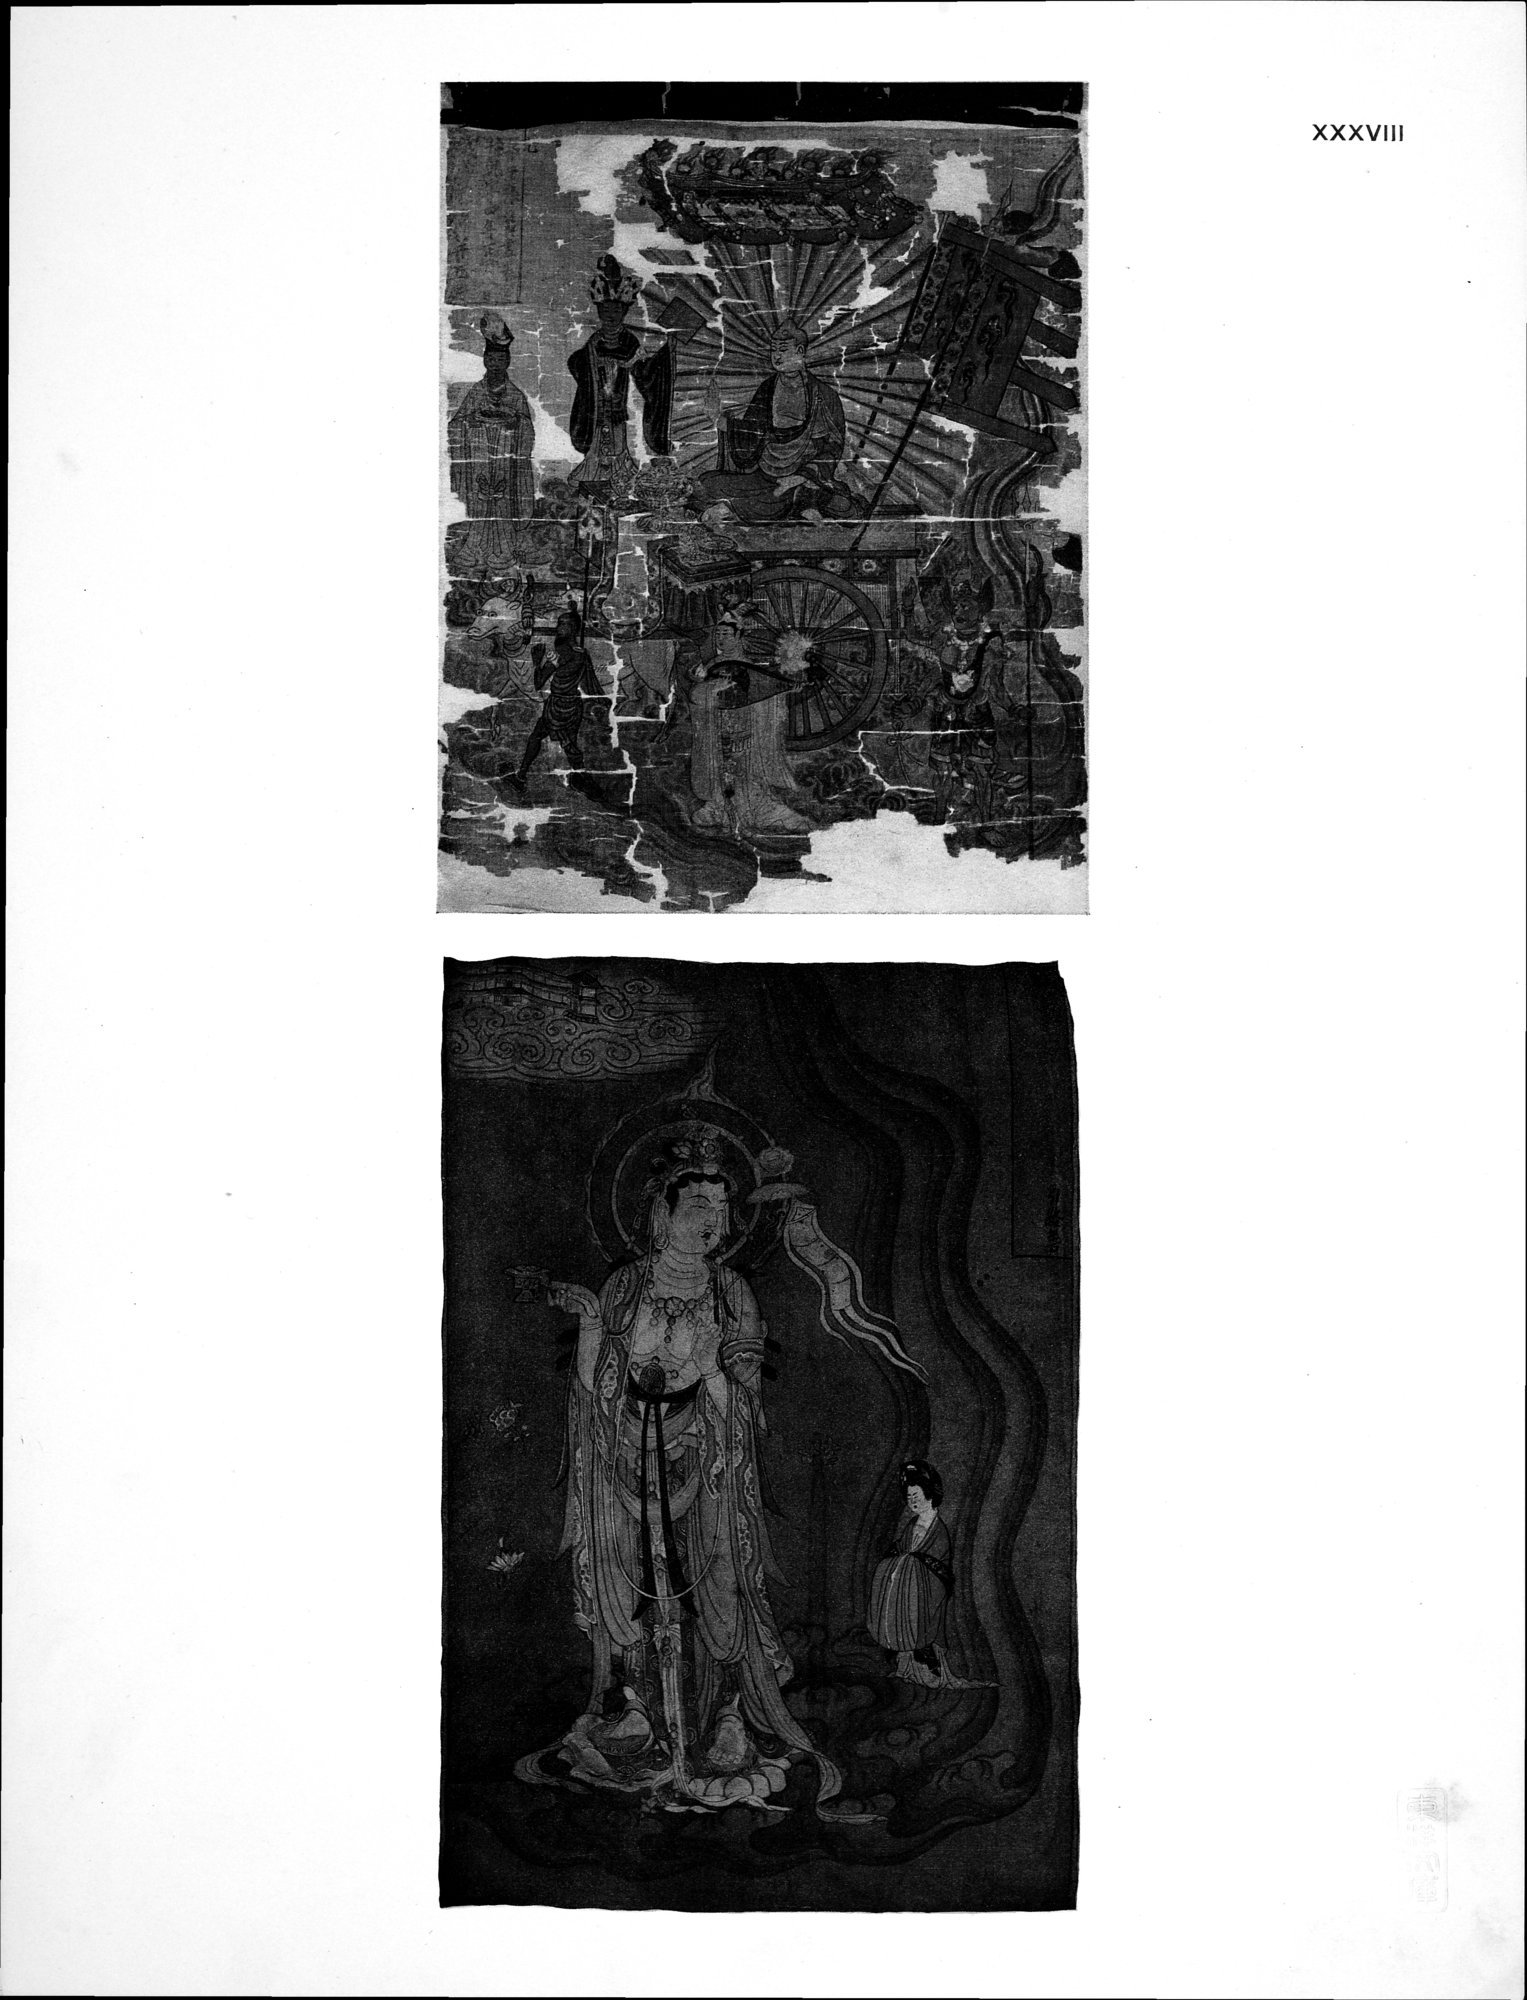 The Thousand Buddhas : vol.1 / Page 124 (Grayscale High Resolution Image)